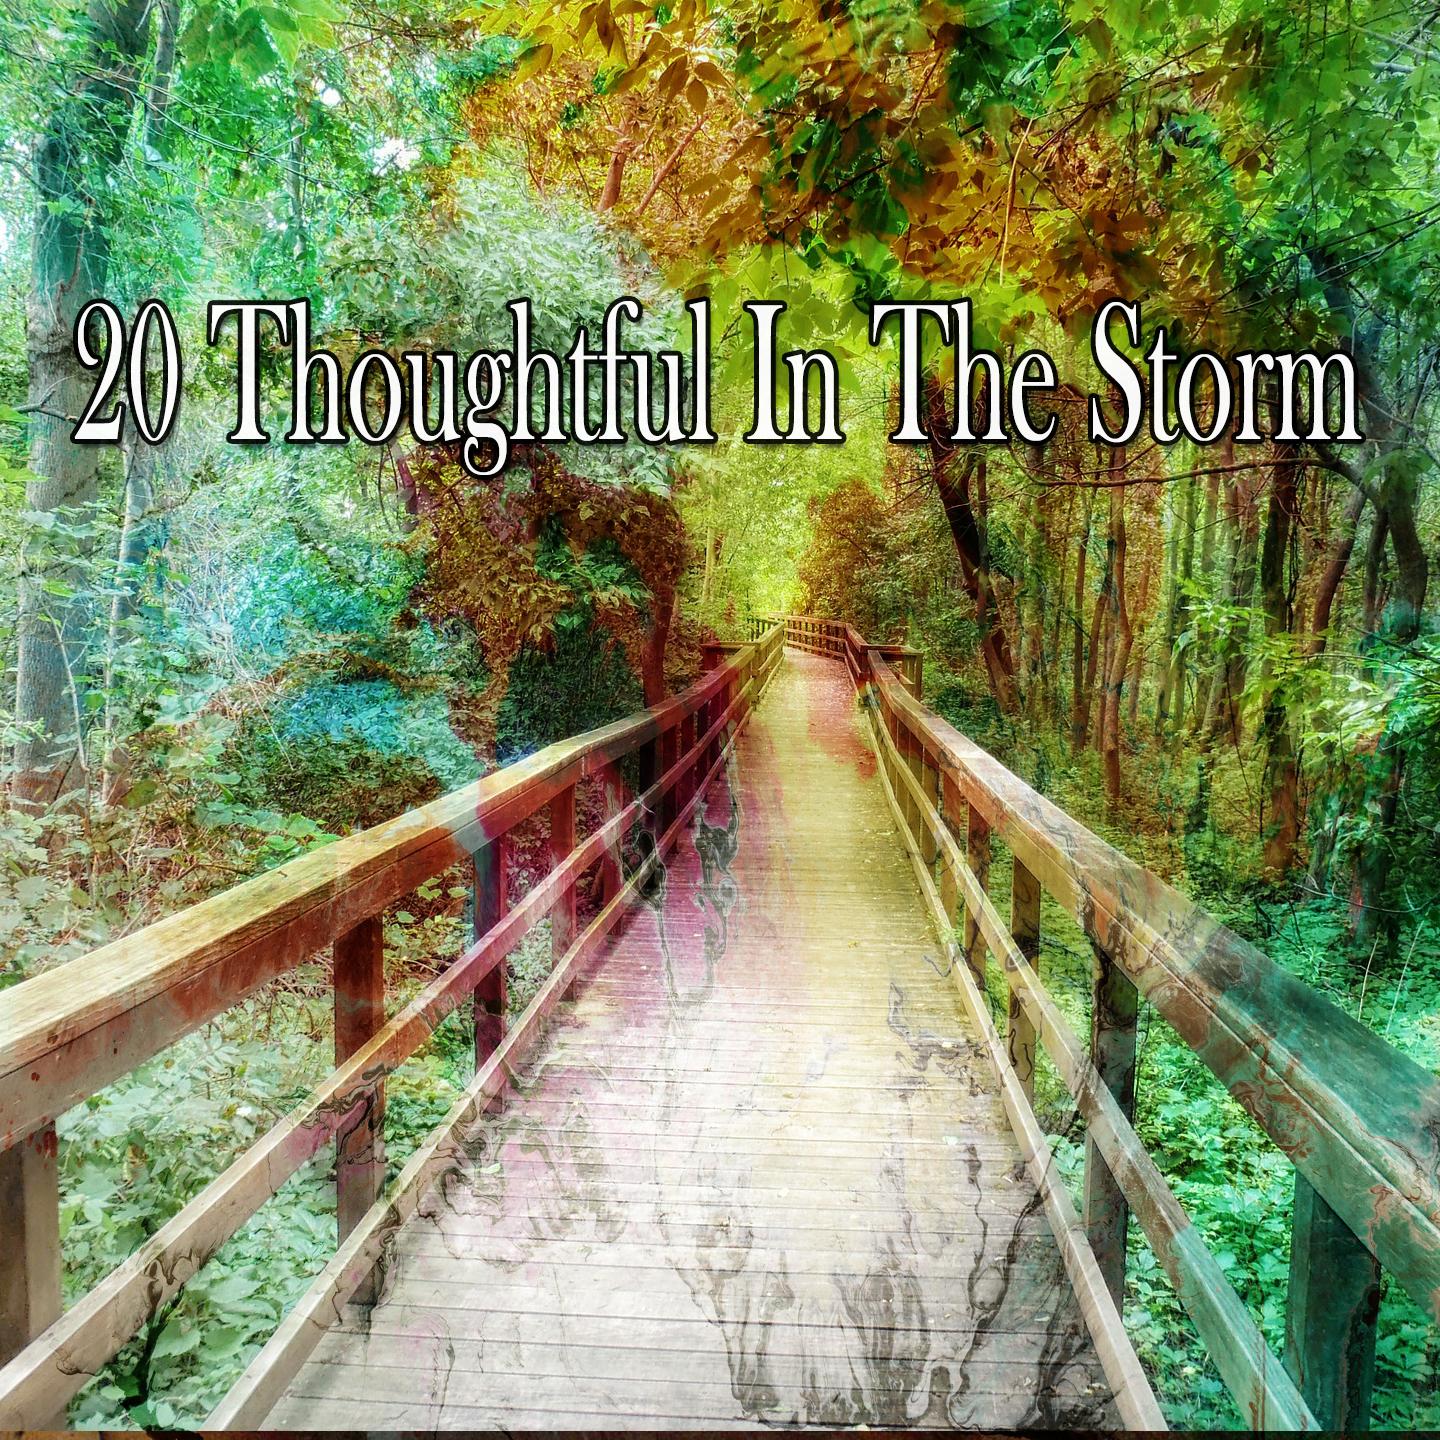 20 Thoughtful in the Storm